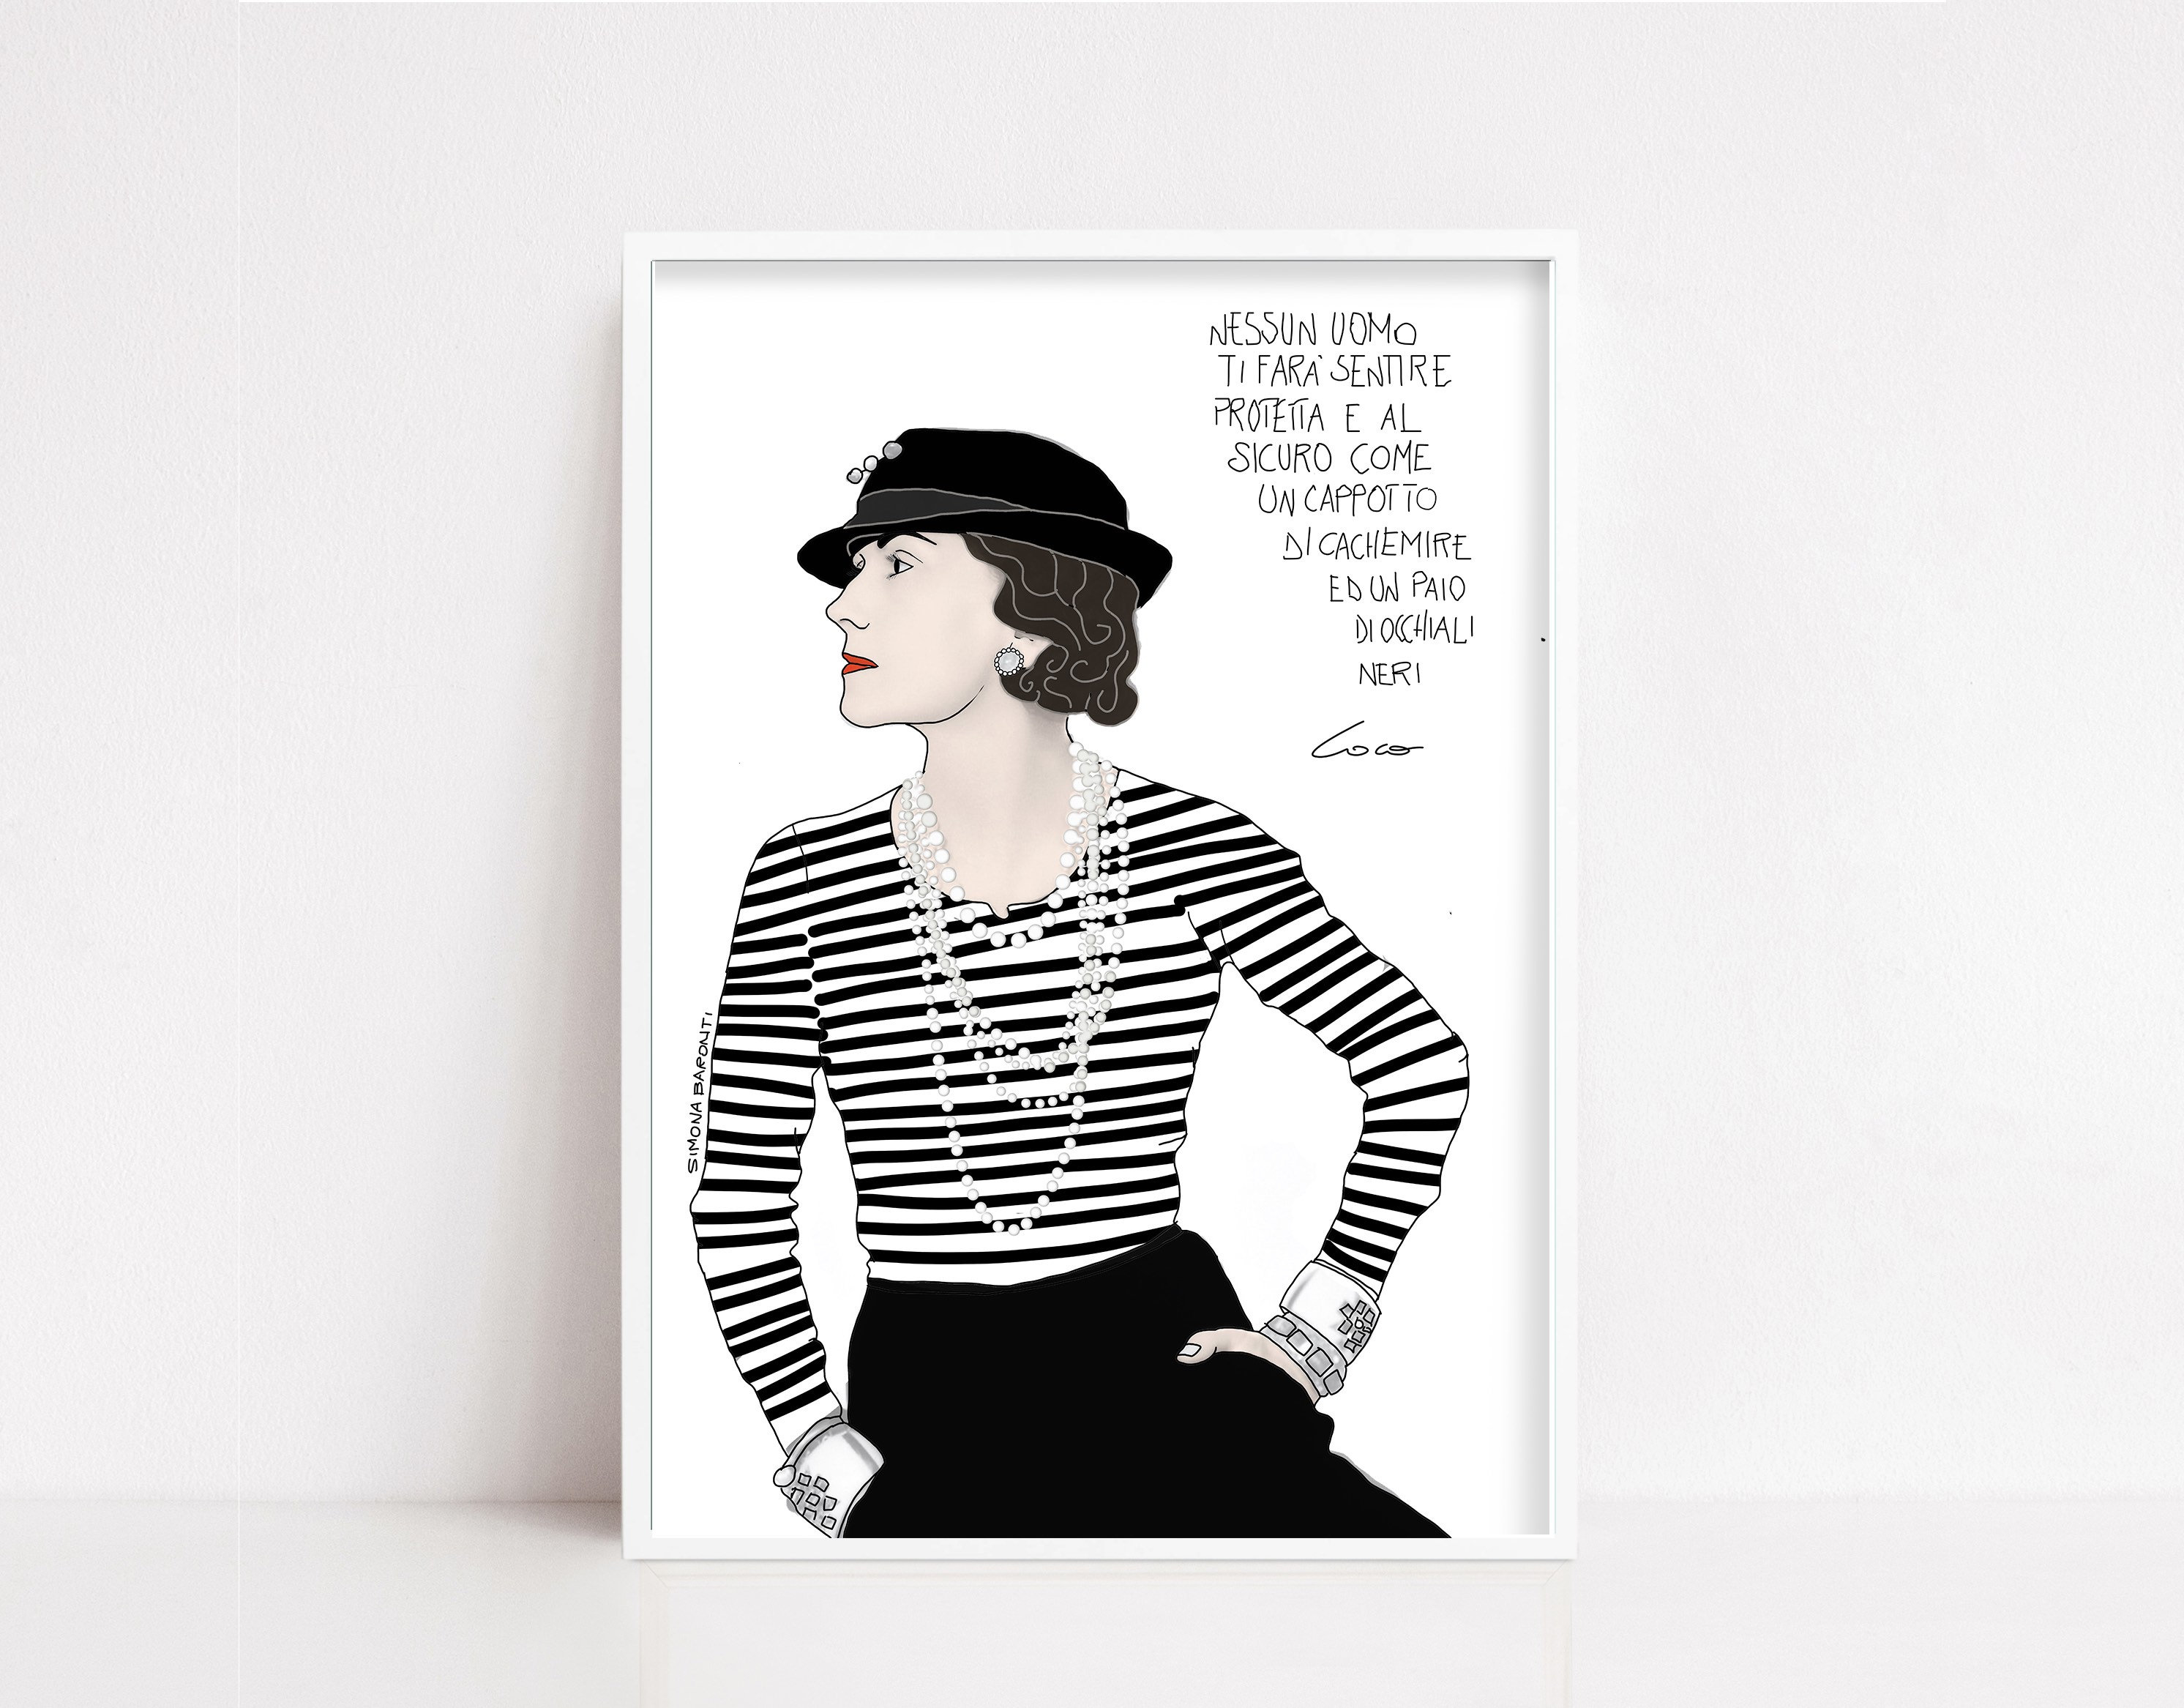 Classy & Fabulous | Coco Chanel Quote Wall Art | 11x14 UNFRAMED Black,  White, Pink Art Print | Contemporary, Positive, Inspirational, Famous  Quotes